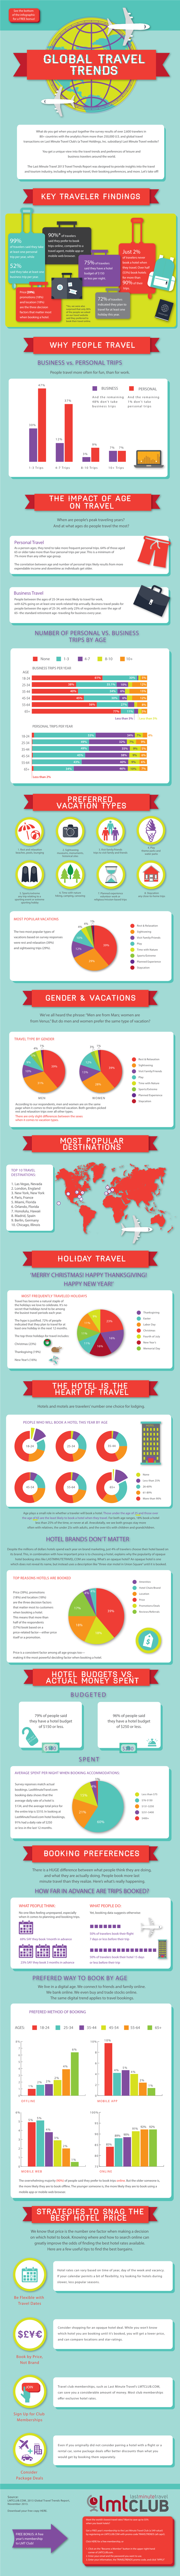 Travel Infographic FINAL-Sourcefiles